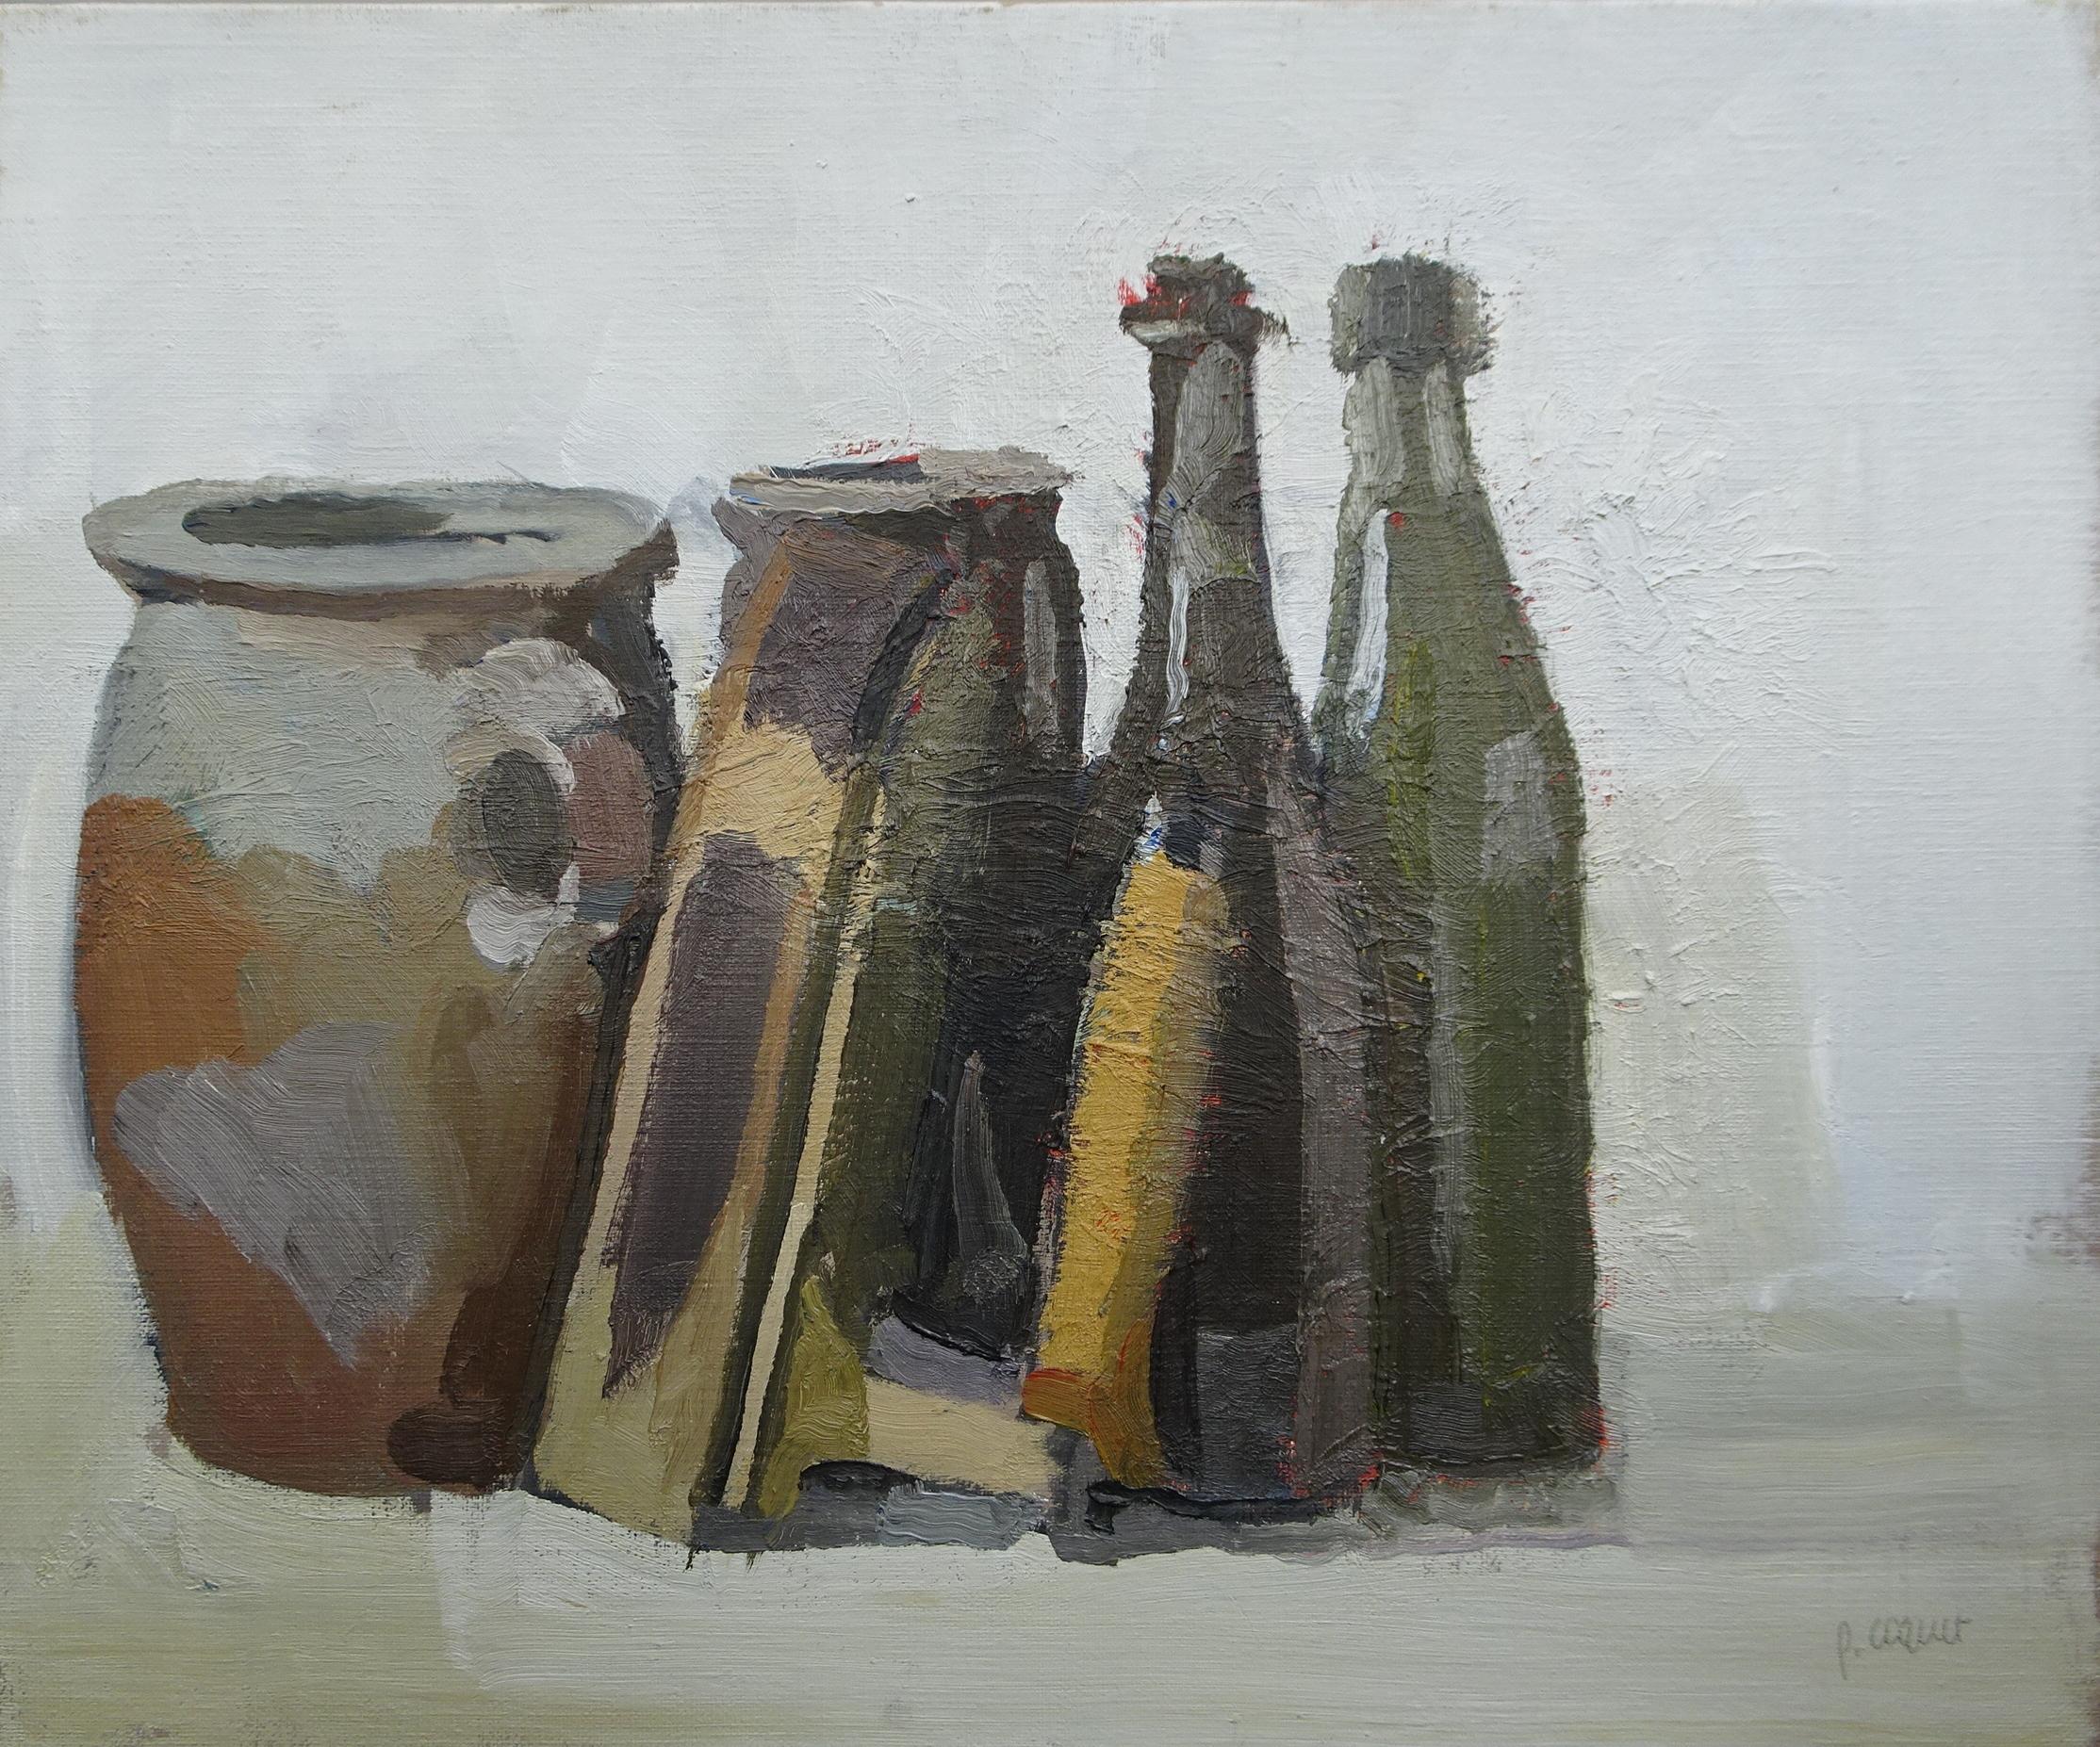 Still life with bottles and an old iron, oil painting in canvas by Pierre Coquet